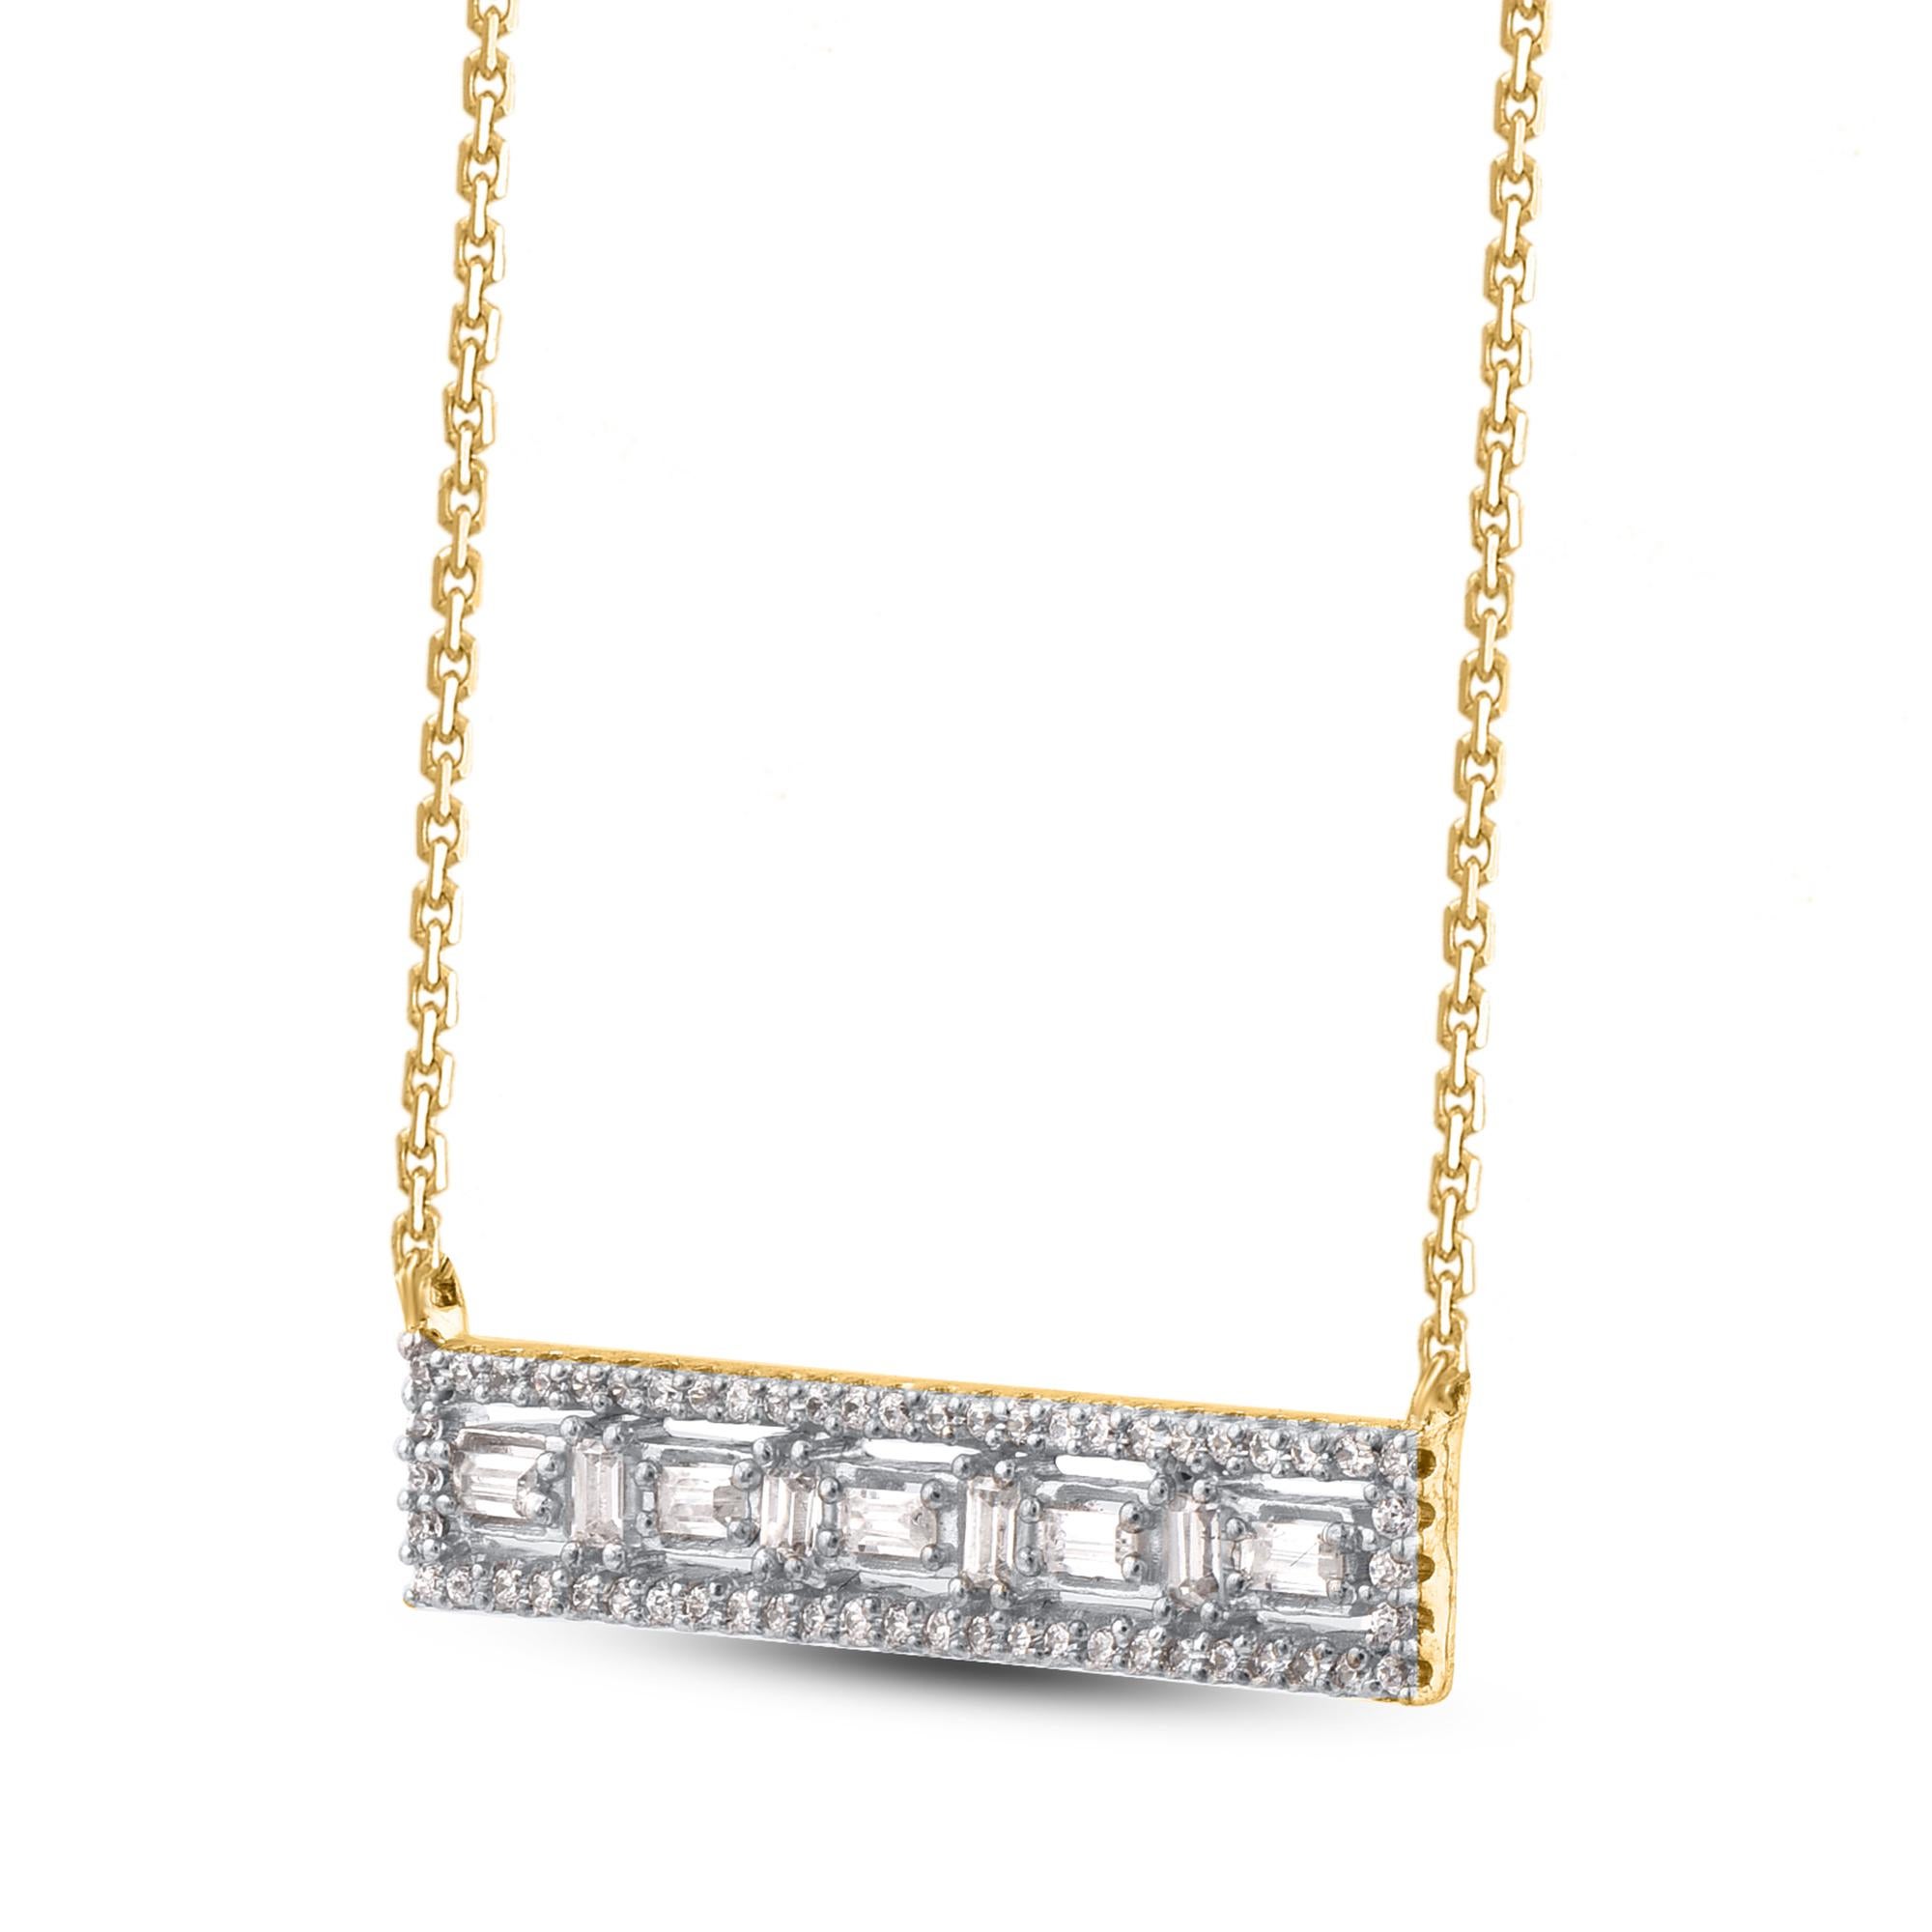 Contemporary TJD 0.25 Carat Natural Round & Baguette Diamond 18KT Yellow Gold Bar Necklace For Sale